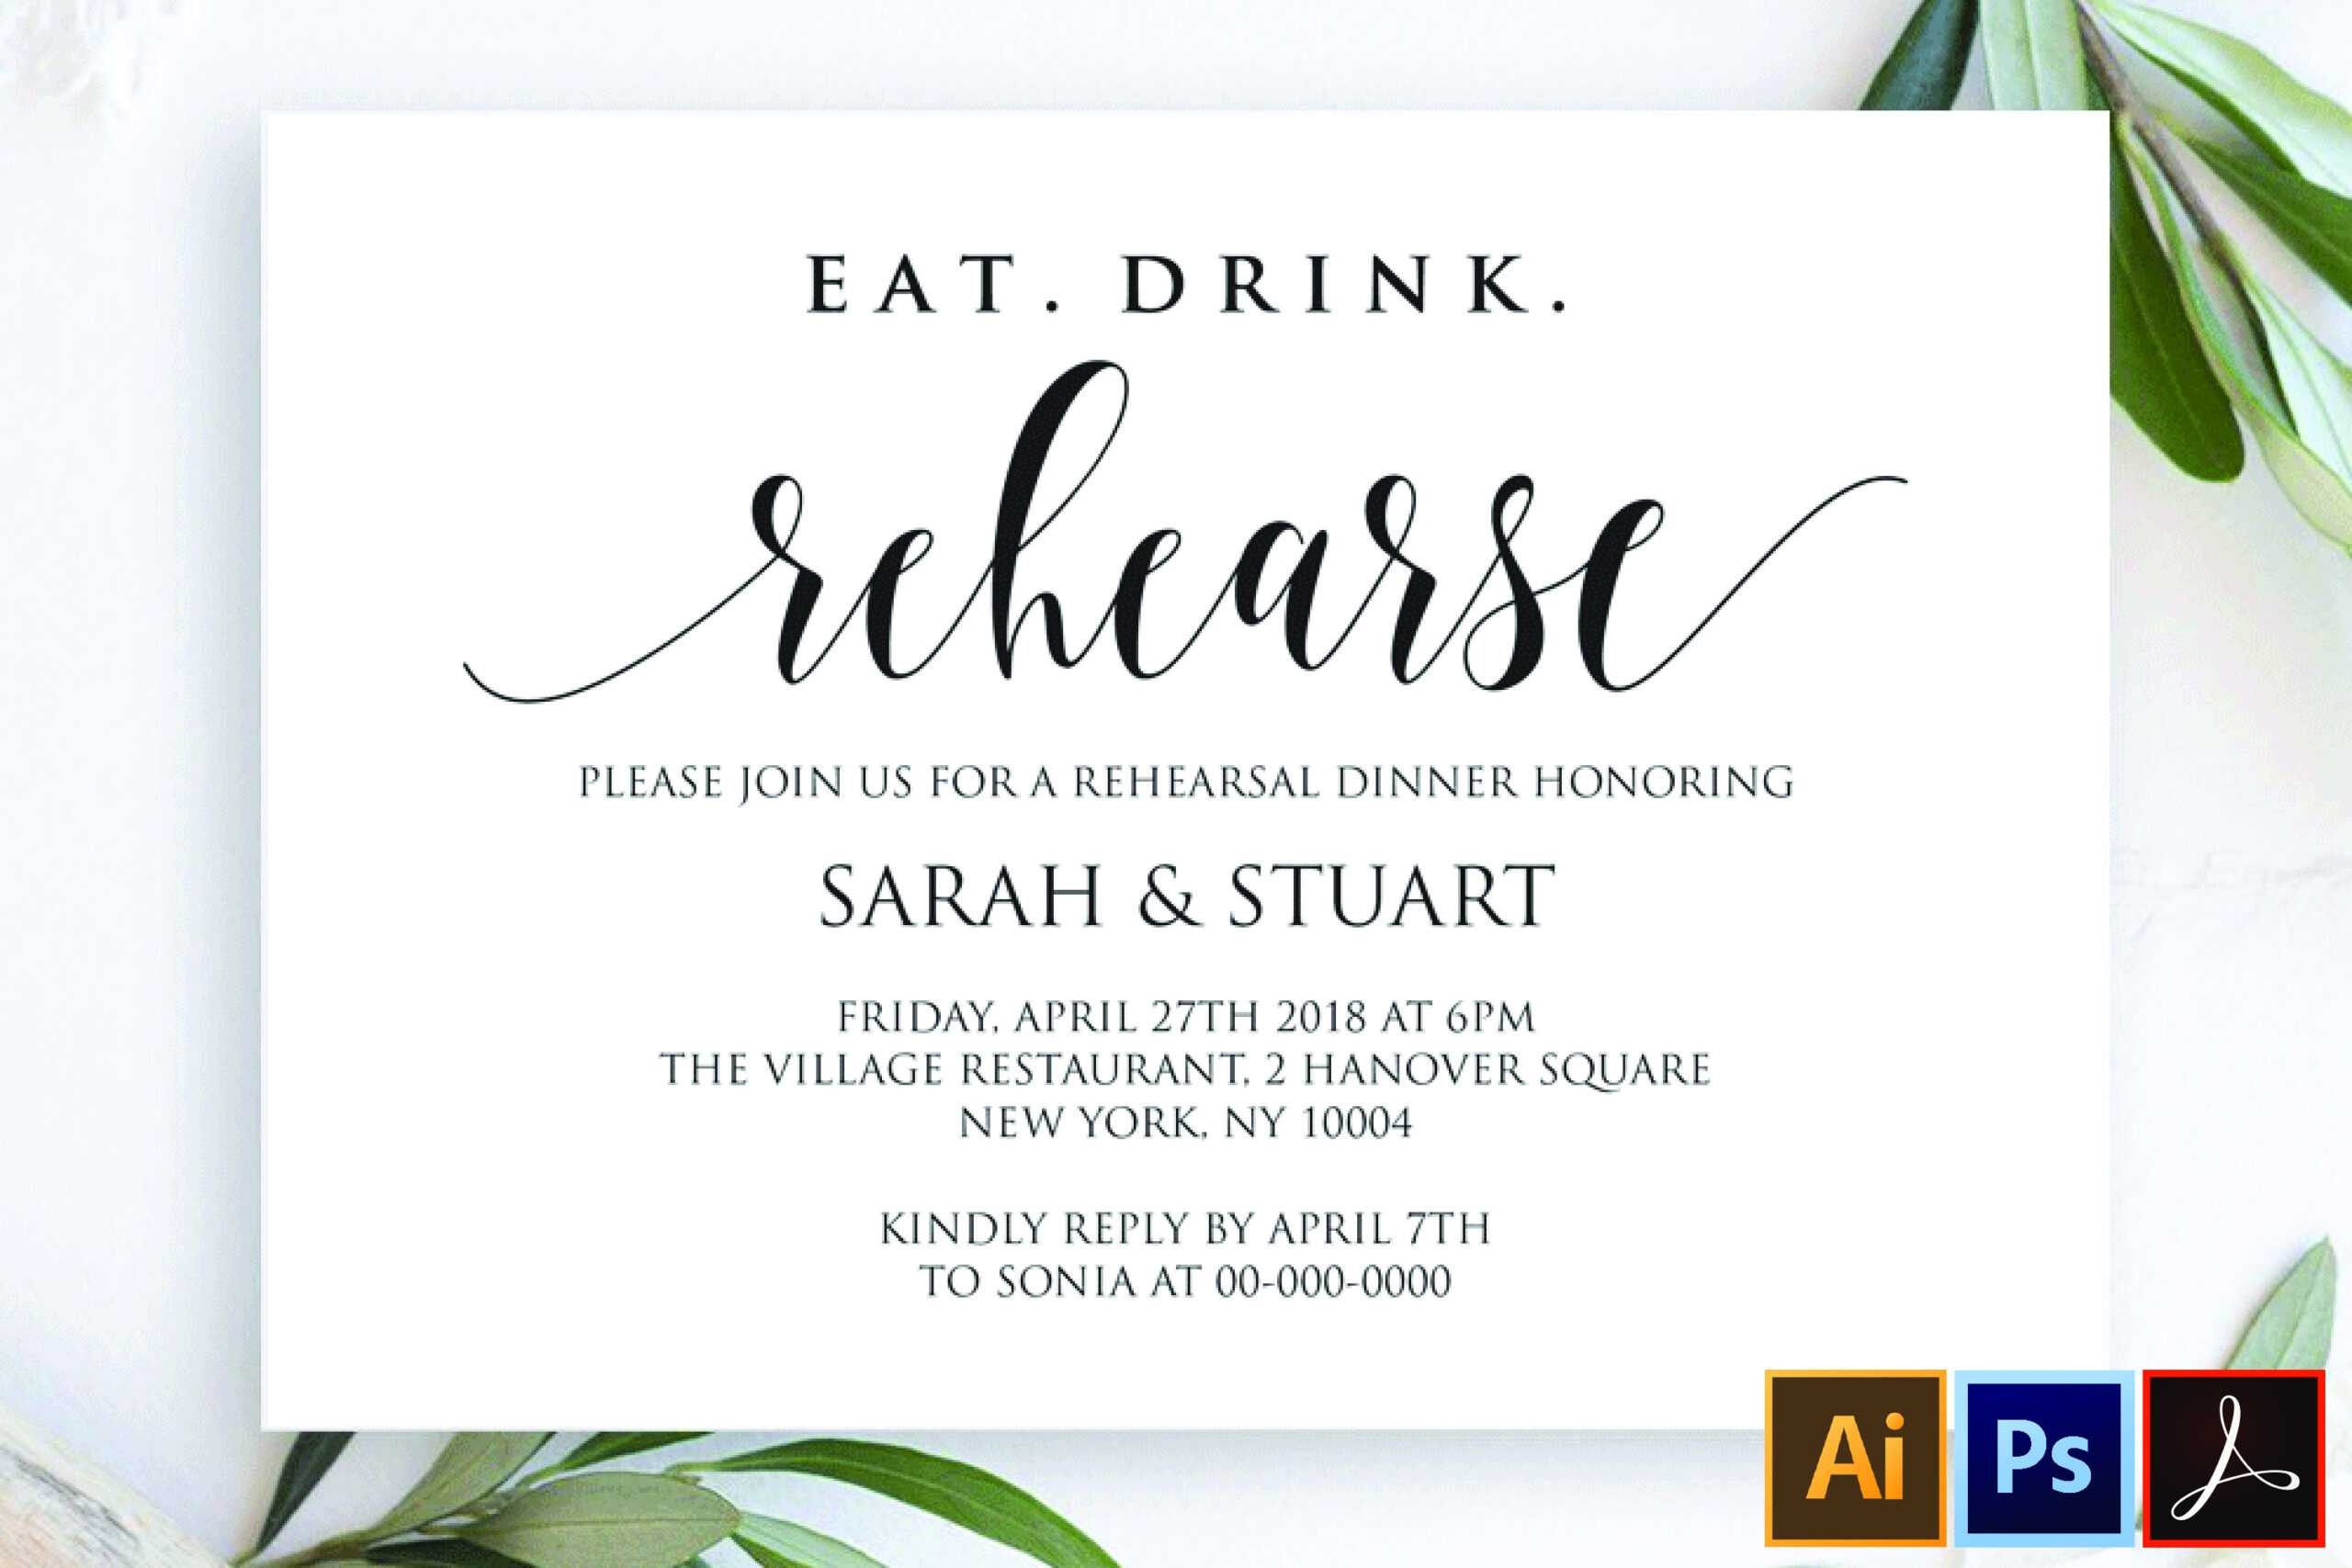 Eat Drink Rehearse Rehearsal Dinner Invitation Template Throughout Frequent Diner Card Template